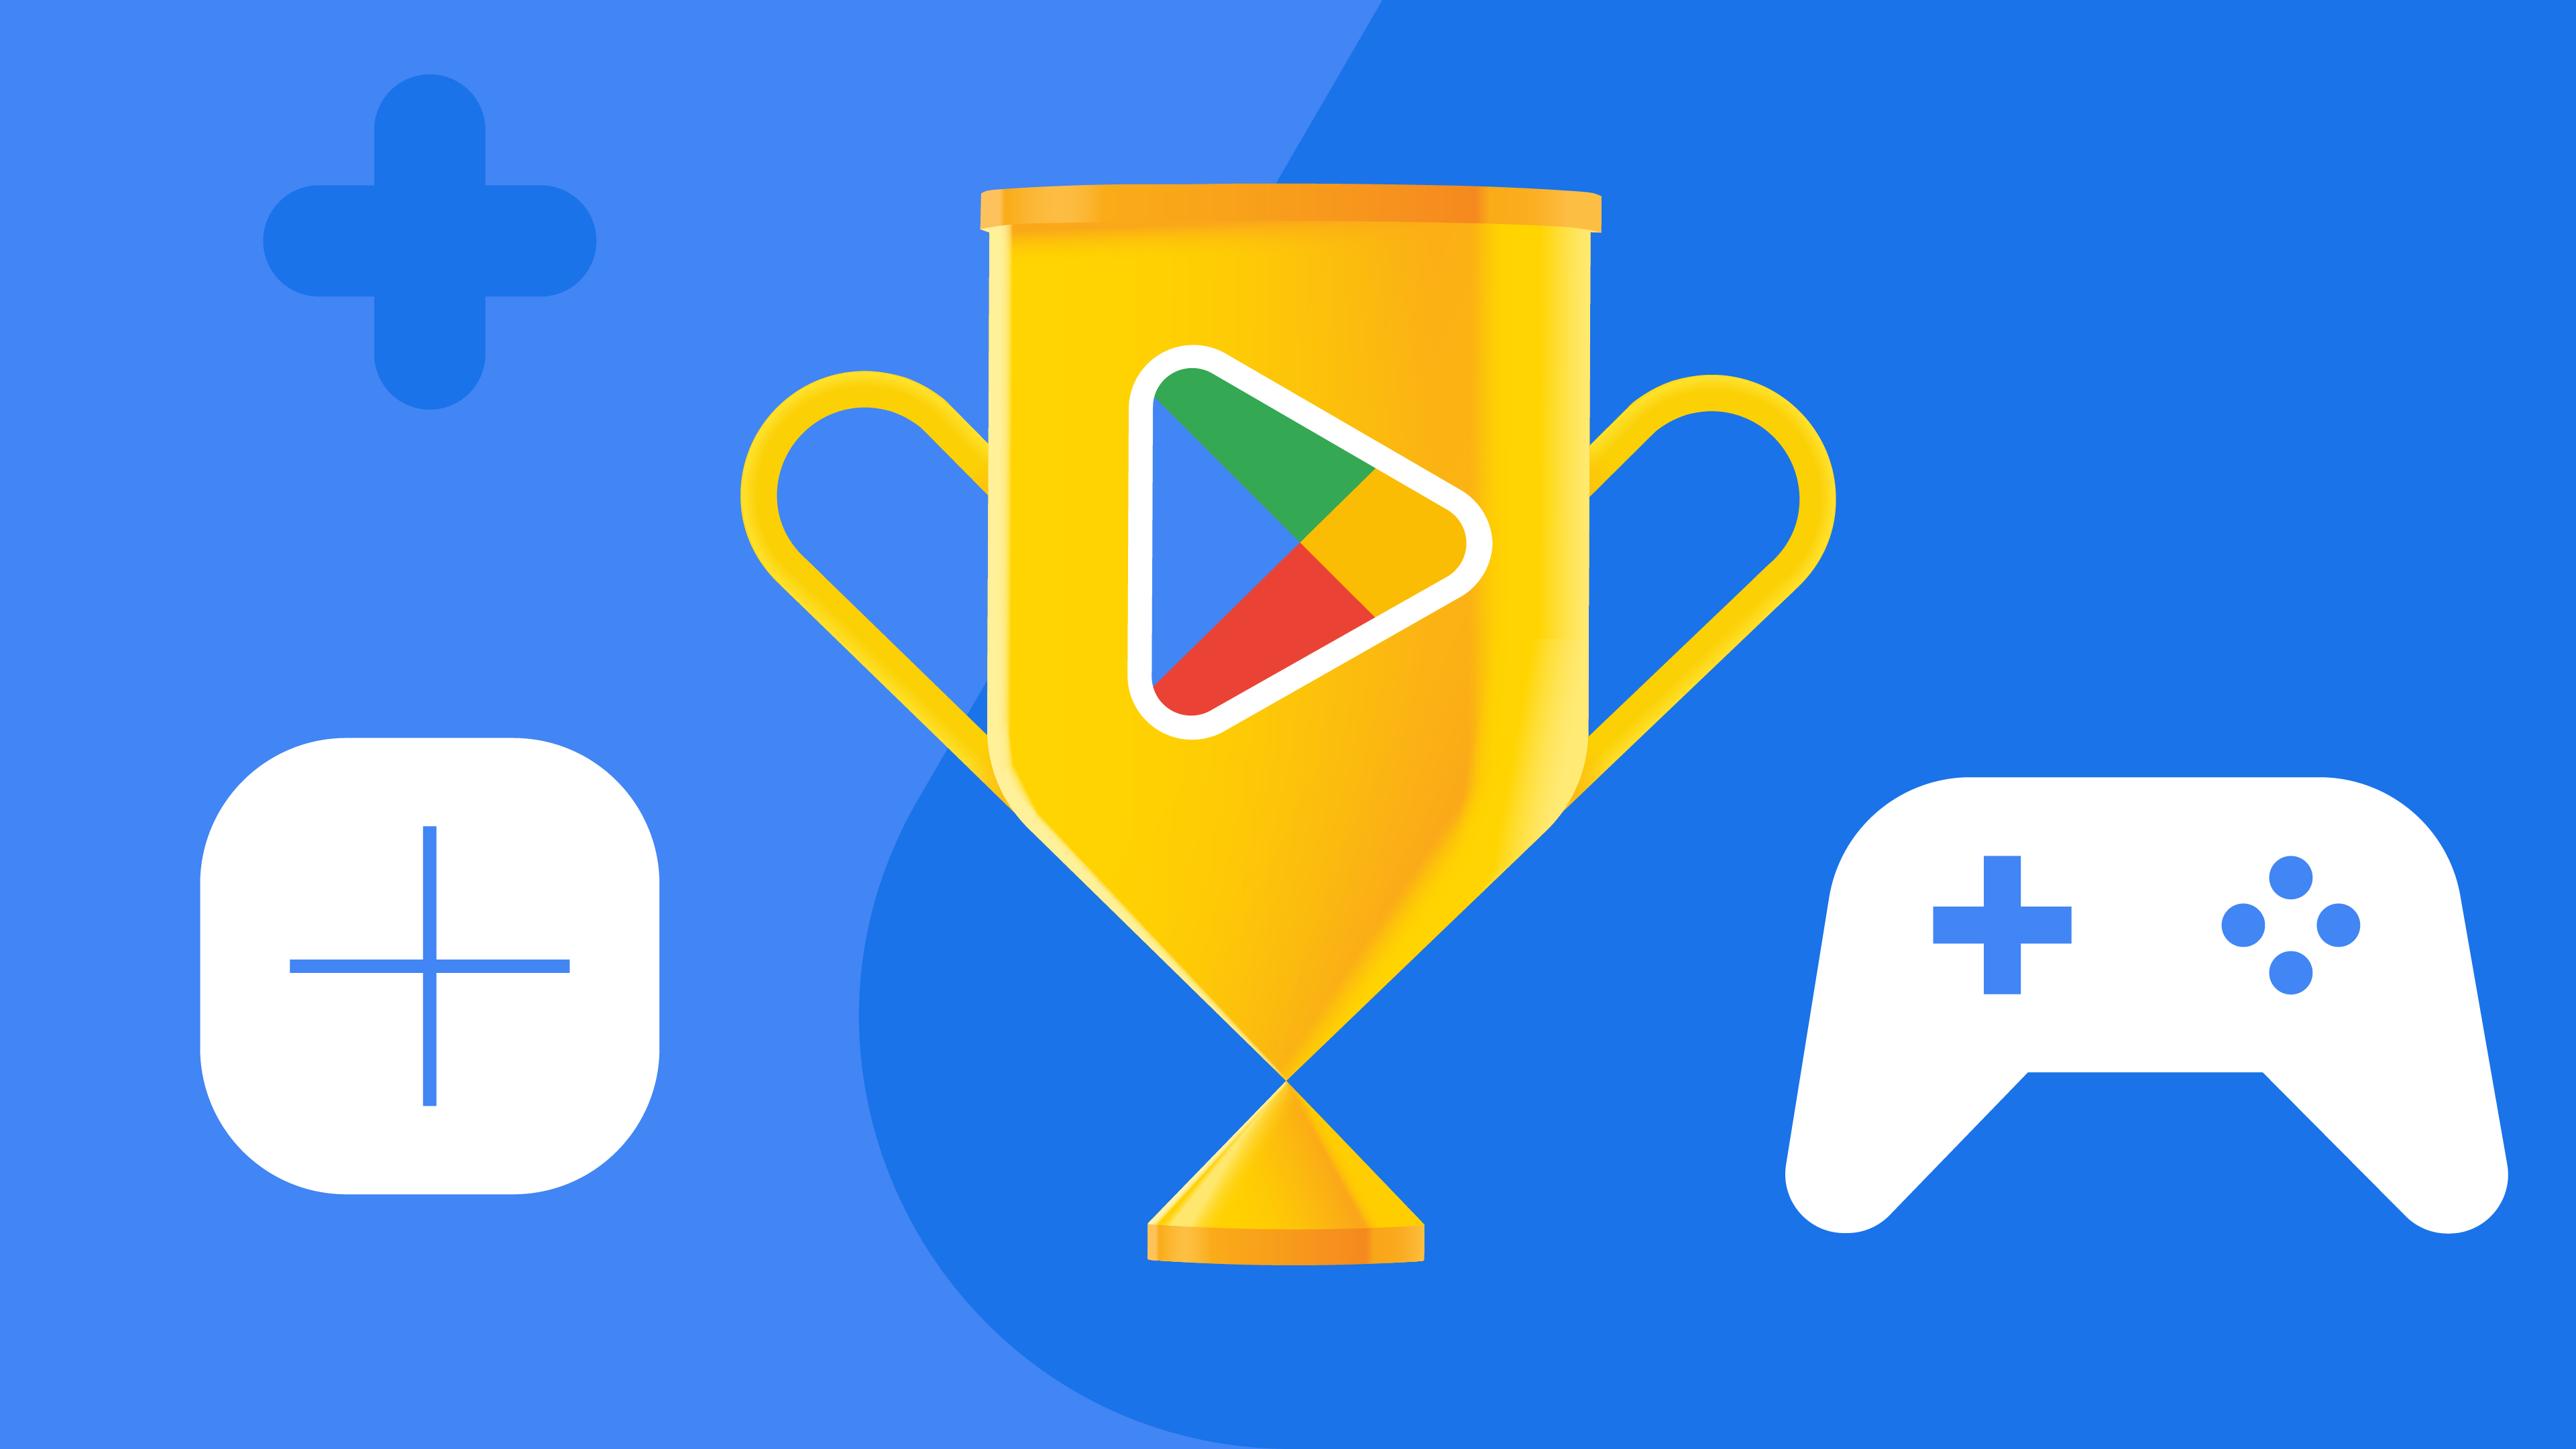 Google Play's best apps and games of 2022